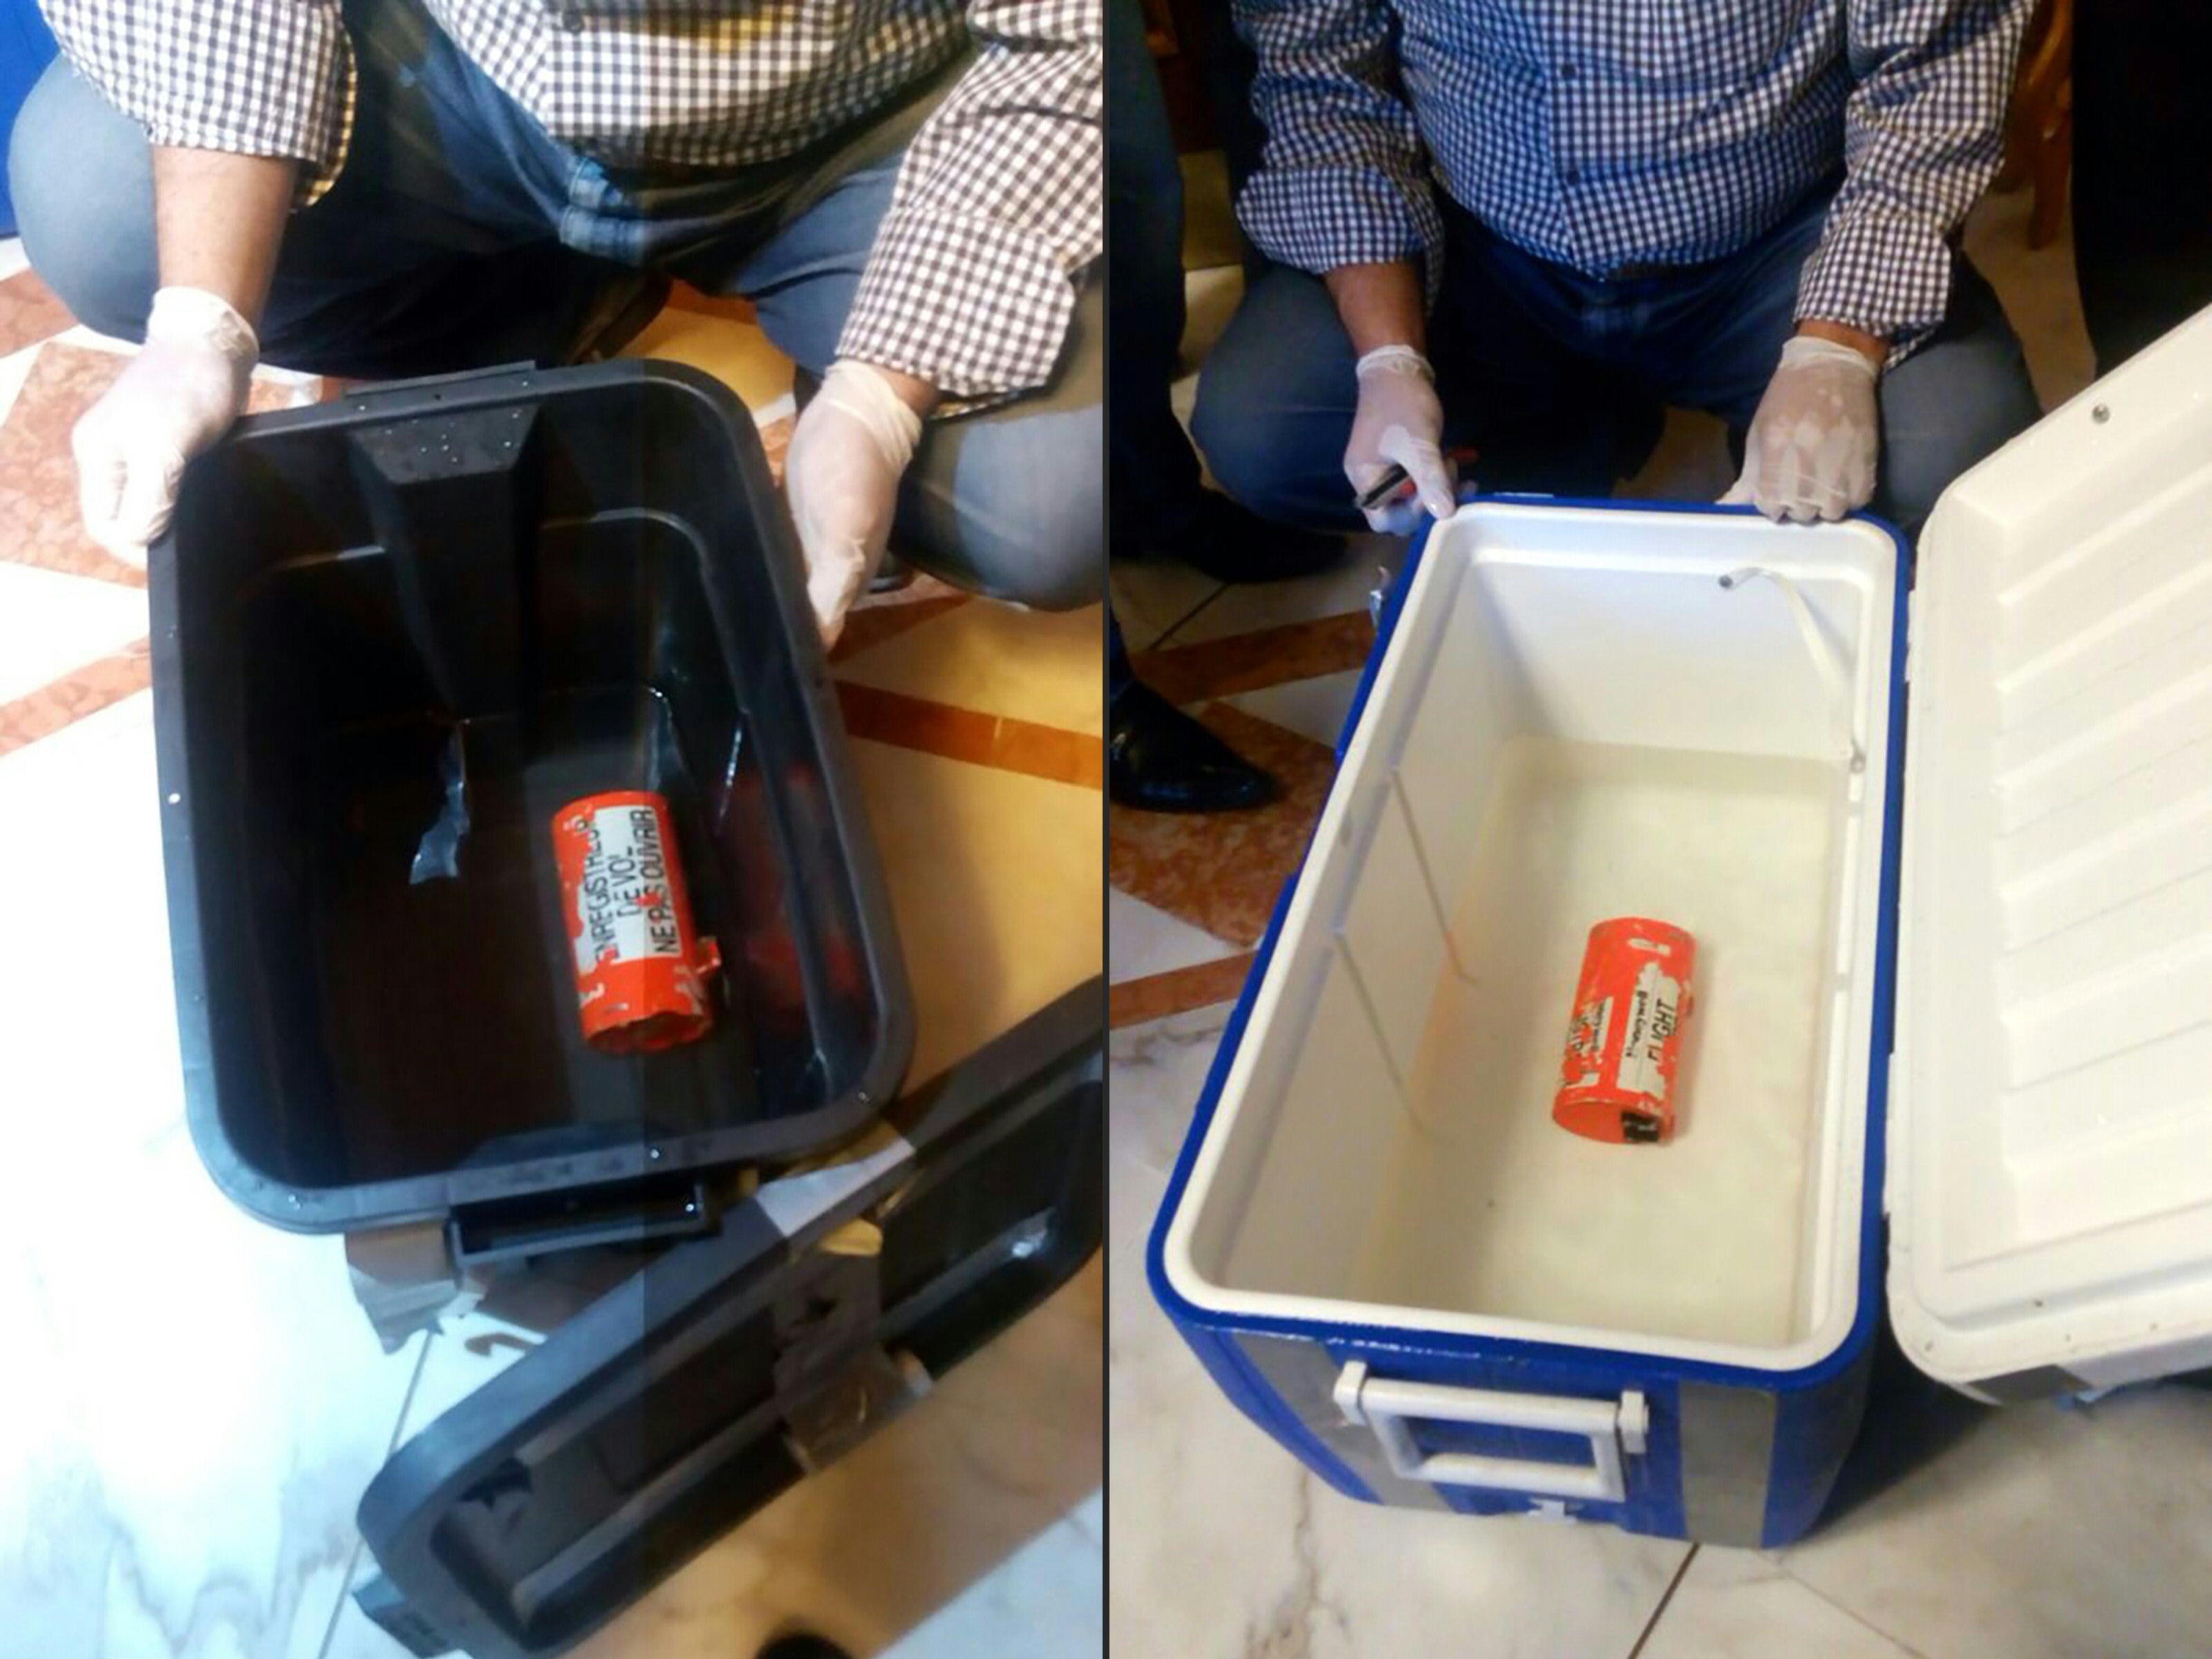 (COMBO) This combination of pictures created on June 17, 2016 shows a handout picture taken at an undisclosed location in Egypt and released by the Egyptian Media Center of the ministry of Civil Aviation on June 17, 2016 showing the flight recorder (L) from the EgyptAir plane, that crashed into the Mediterranean last month, after it was recovered from the bottom of the Mediterranean by search teams. AND a handout picture taken at an undisclosed location in Egypt and released by the Egyptian Media Center of the ministry of Civil Aviation on June 17, 2016 showing one of the two black boxes from the EgyptAir plane, that crashed into the Mediterranean last month, after it was recovered from the bottom of the Mediterranean by search teams. Egyptian investigators said search teams managed to recover the Airbus A320's flight data recorder -- which gathers information about the speed, altitude and direction of the plane -- a day after they retrieved its cockpit voice recorder. EgyptAir Flight MS804 from Paris to Cairo disappeared from radar screens in the eastern Mediterranean last month with 66 people on board, and a vast search operation has since scoured swathes of sea off Egypt's northern coast. / AFP PHOTO / MEDIA CENTER OF THE EGYPTIAN MINISTRY OF CIVIL AVIATION / HO / ===RESTRICTED TO EDITORIAL USE - MANDATORY CREDIT "AFP PHOTO / MEDIA CENTER OF THE EGYPTIAN MINISTRY OF CIVIL AVIATION - NO MARKETING NO ADVERTISING CAMPAIGNS - DISTRIBUTED AS A SERVICE TO CLIENTS FROM FROM ALTERNATIVE SOURCES, THEREFORE AFP IS NOT RESPONSIBLE FOR ANY DIGITAL ALTERATIONS TO THE PICTURE'S EDITORIAL CONTENT, DATE AND LOCATION WHICH CANNOT BE INDEPENDENTLY VERIFIED == ===RESTRICTED TO EDITORIAL USE - MANDATORY CREDIT "AFP PHOTO / MEDIA CENTER OF THE EGYPTIAN MINISTRY OF CIVIL AVIATION - NO MARKETING NO ADVERTISING CAMPAIGNS - DISTRIBUTED AS A SERVICE TO CLIENTS FROM FROM ALTERNATIVE SOURCES, THEREFORE AFP IS NOT RESPONSIBLE FOR ANY DIGITAL ALTERATIONS TO THE PICTURE'S EDITORIAL CONTE